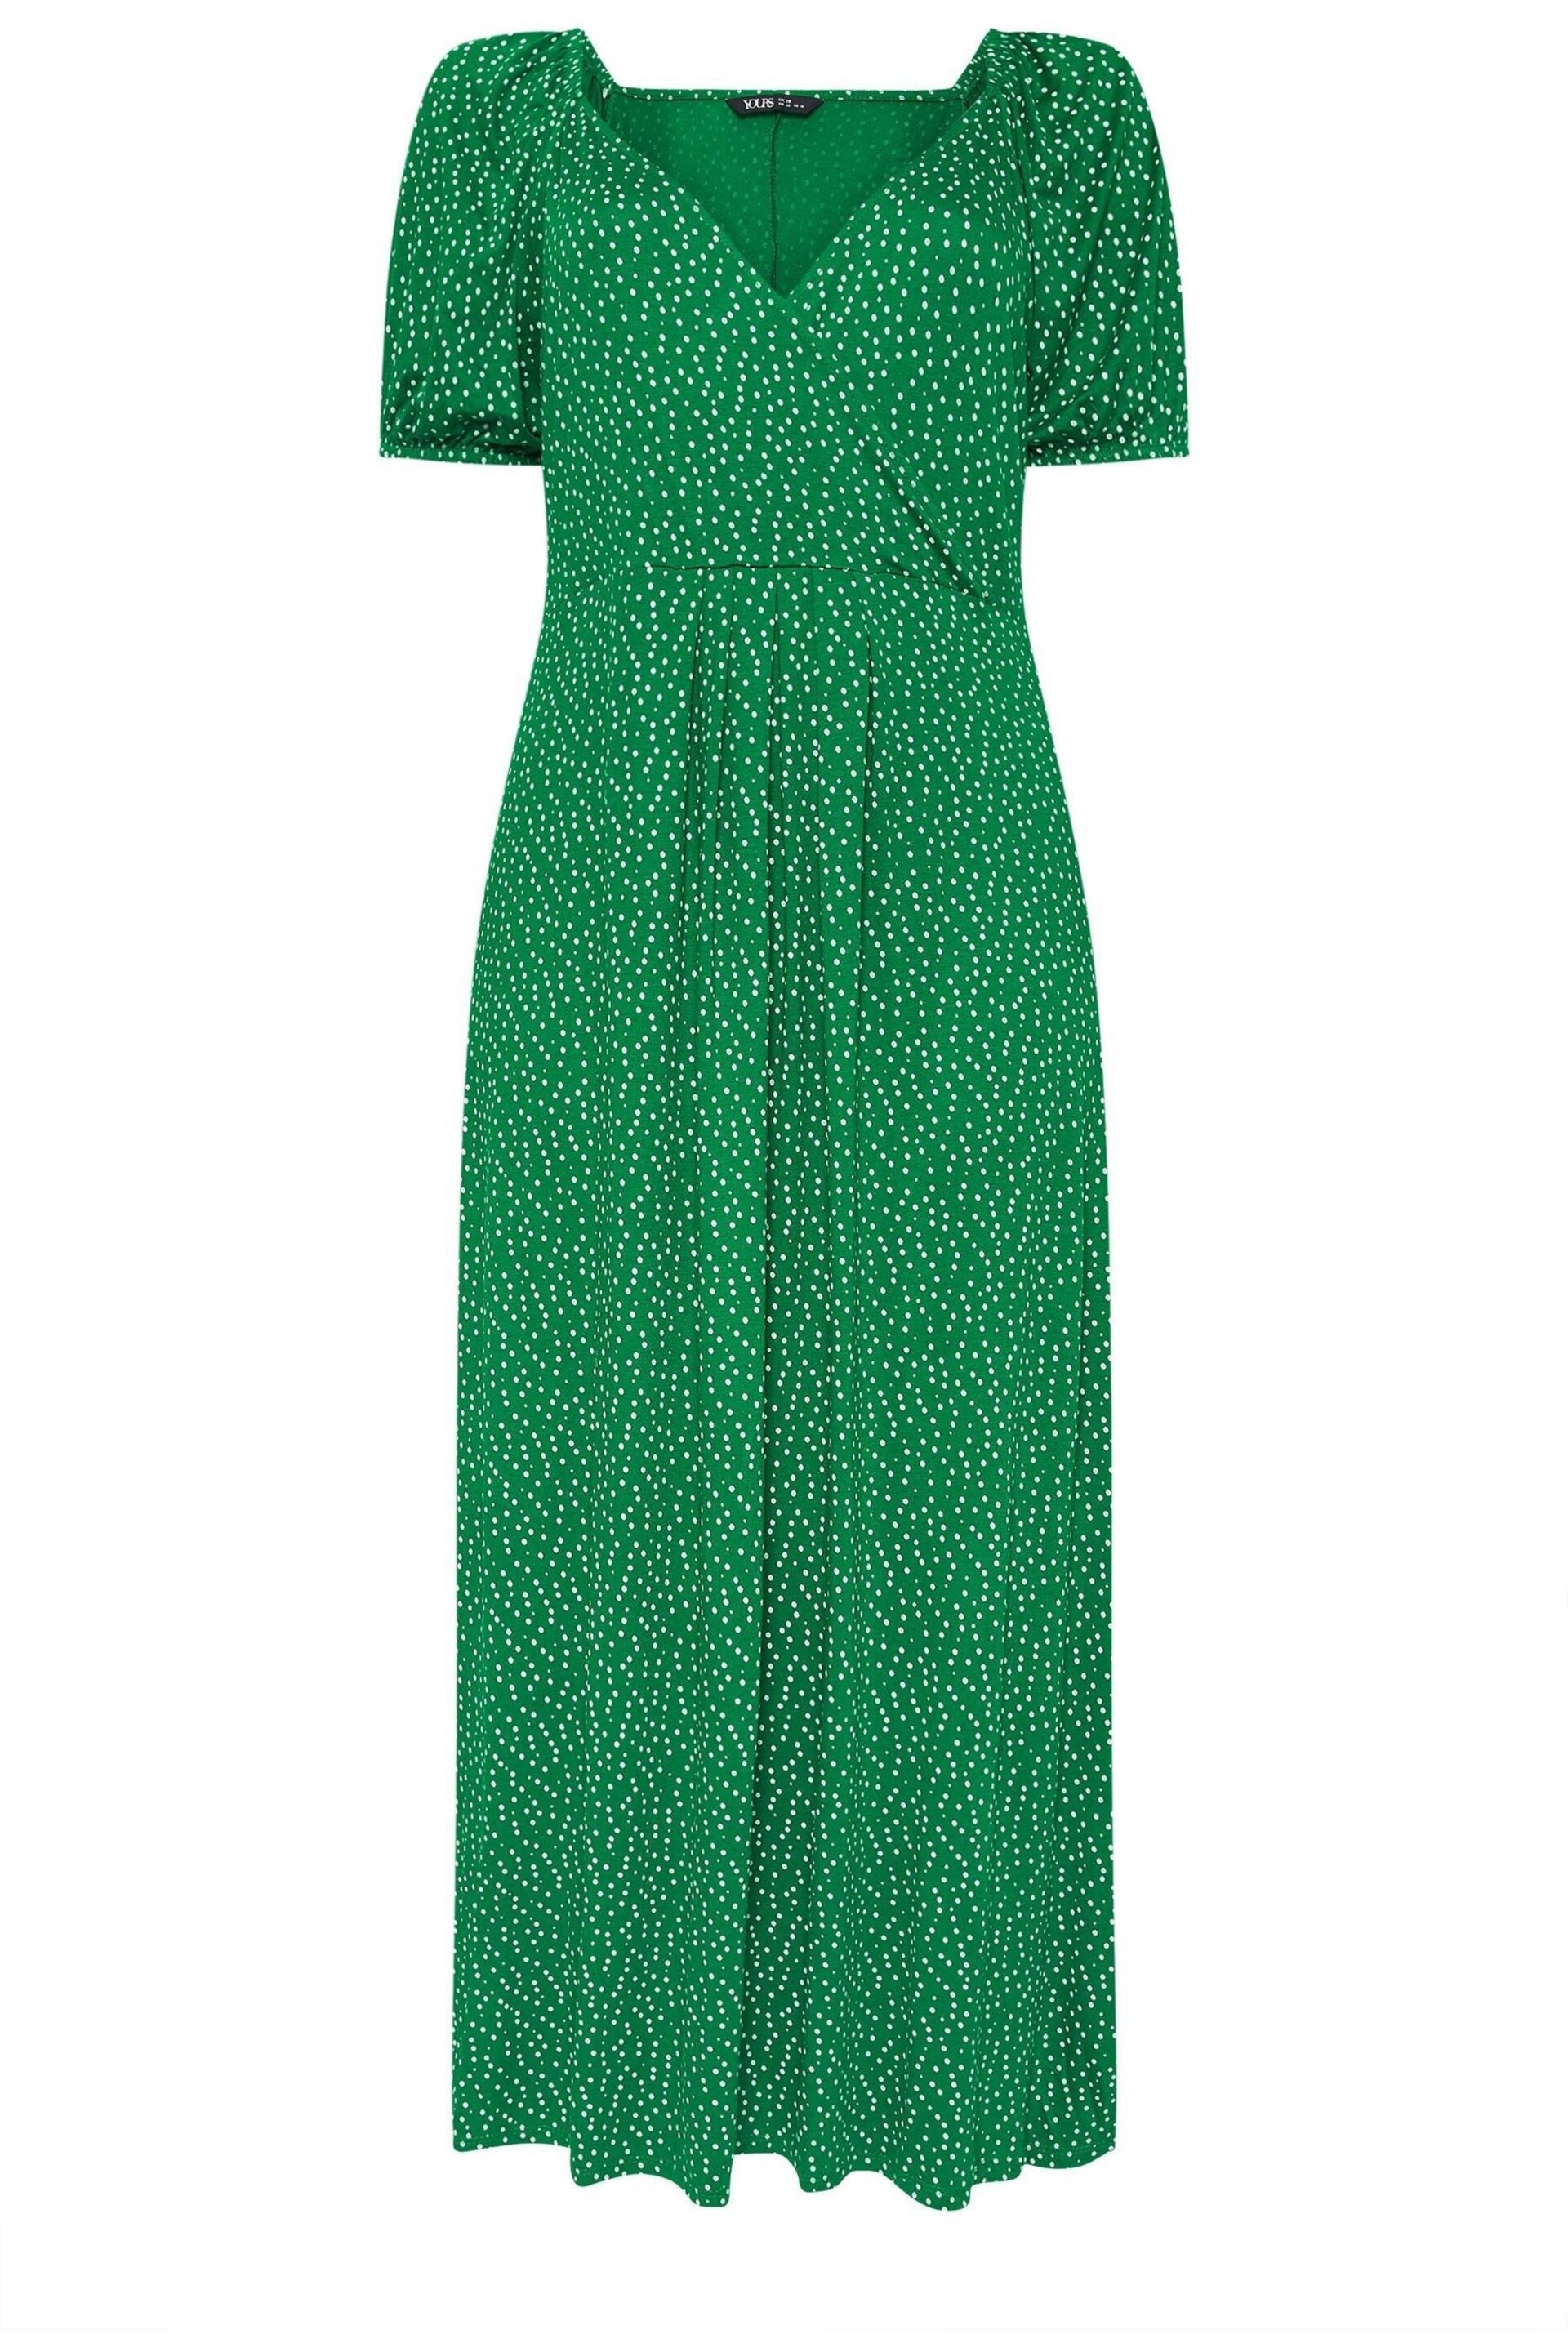 Yours Curve Green Dot Print Tiered Maxi Dress - Image 5 of 5